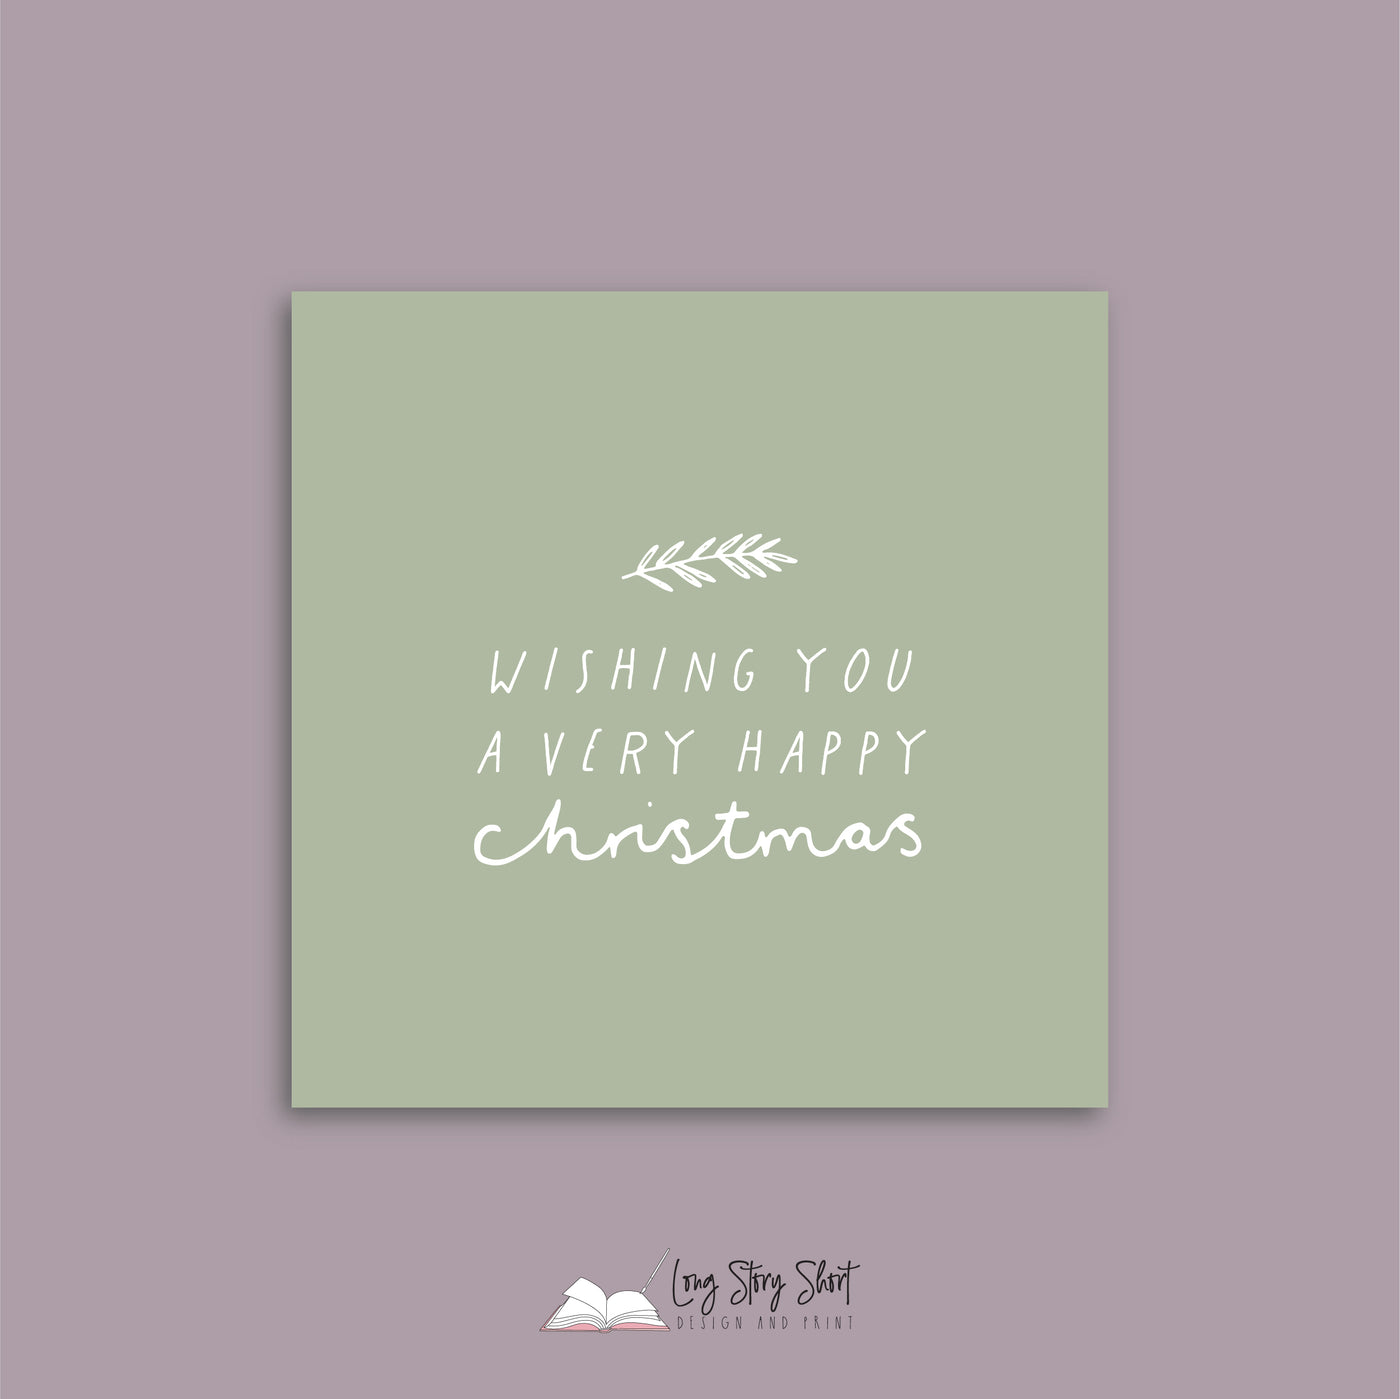 Olive Have a Leafy Christmas Vinyl Label Pack Square Matte/Gloss